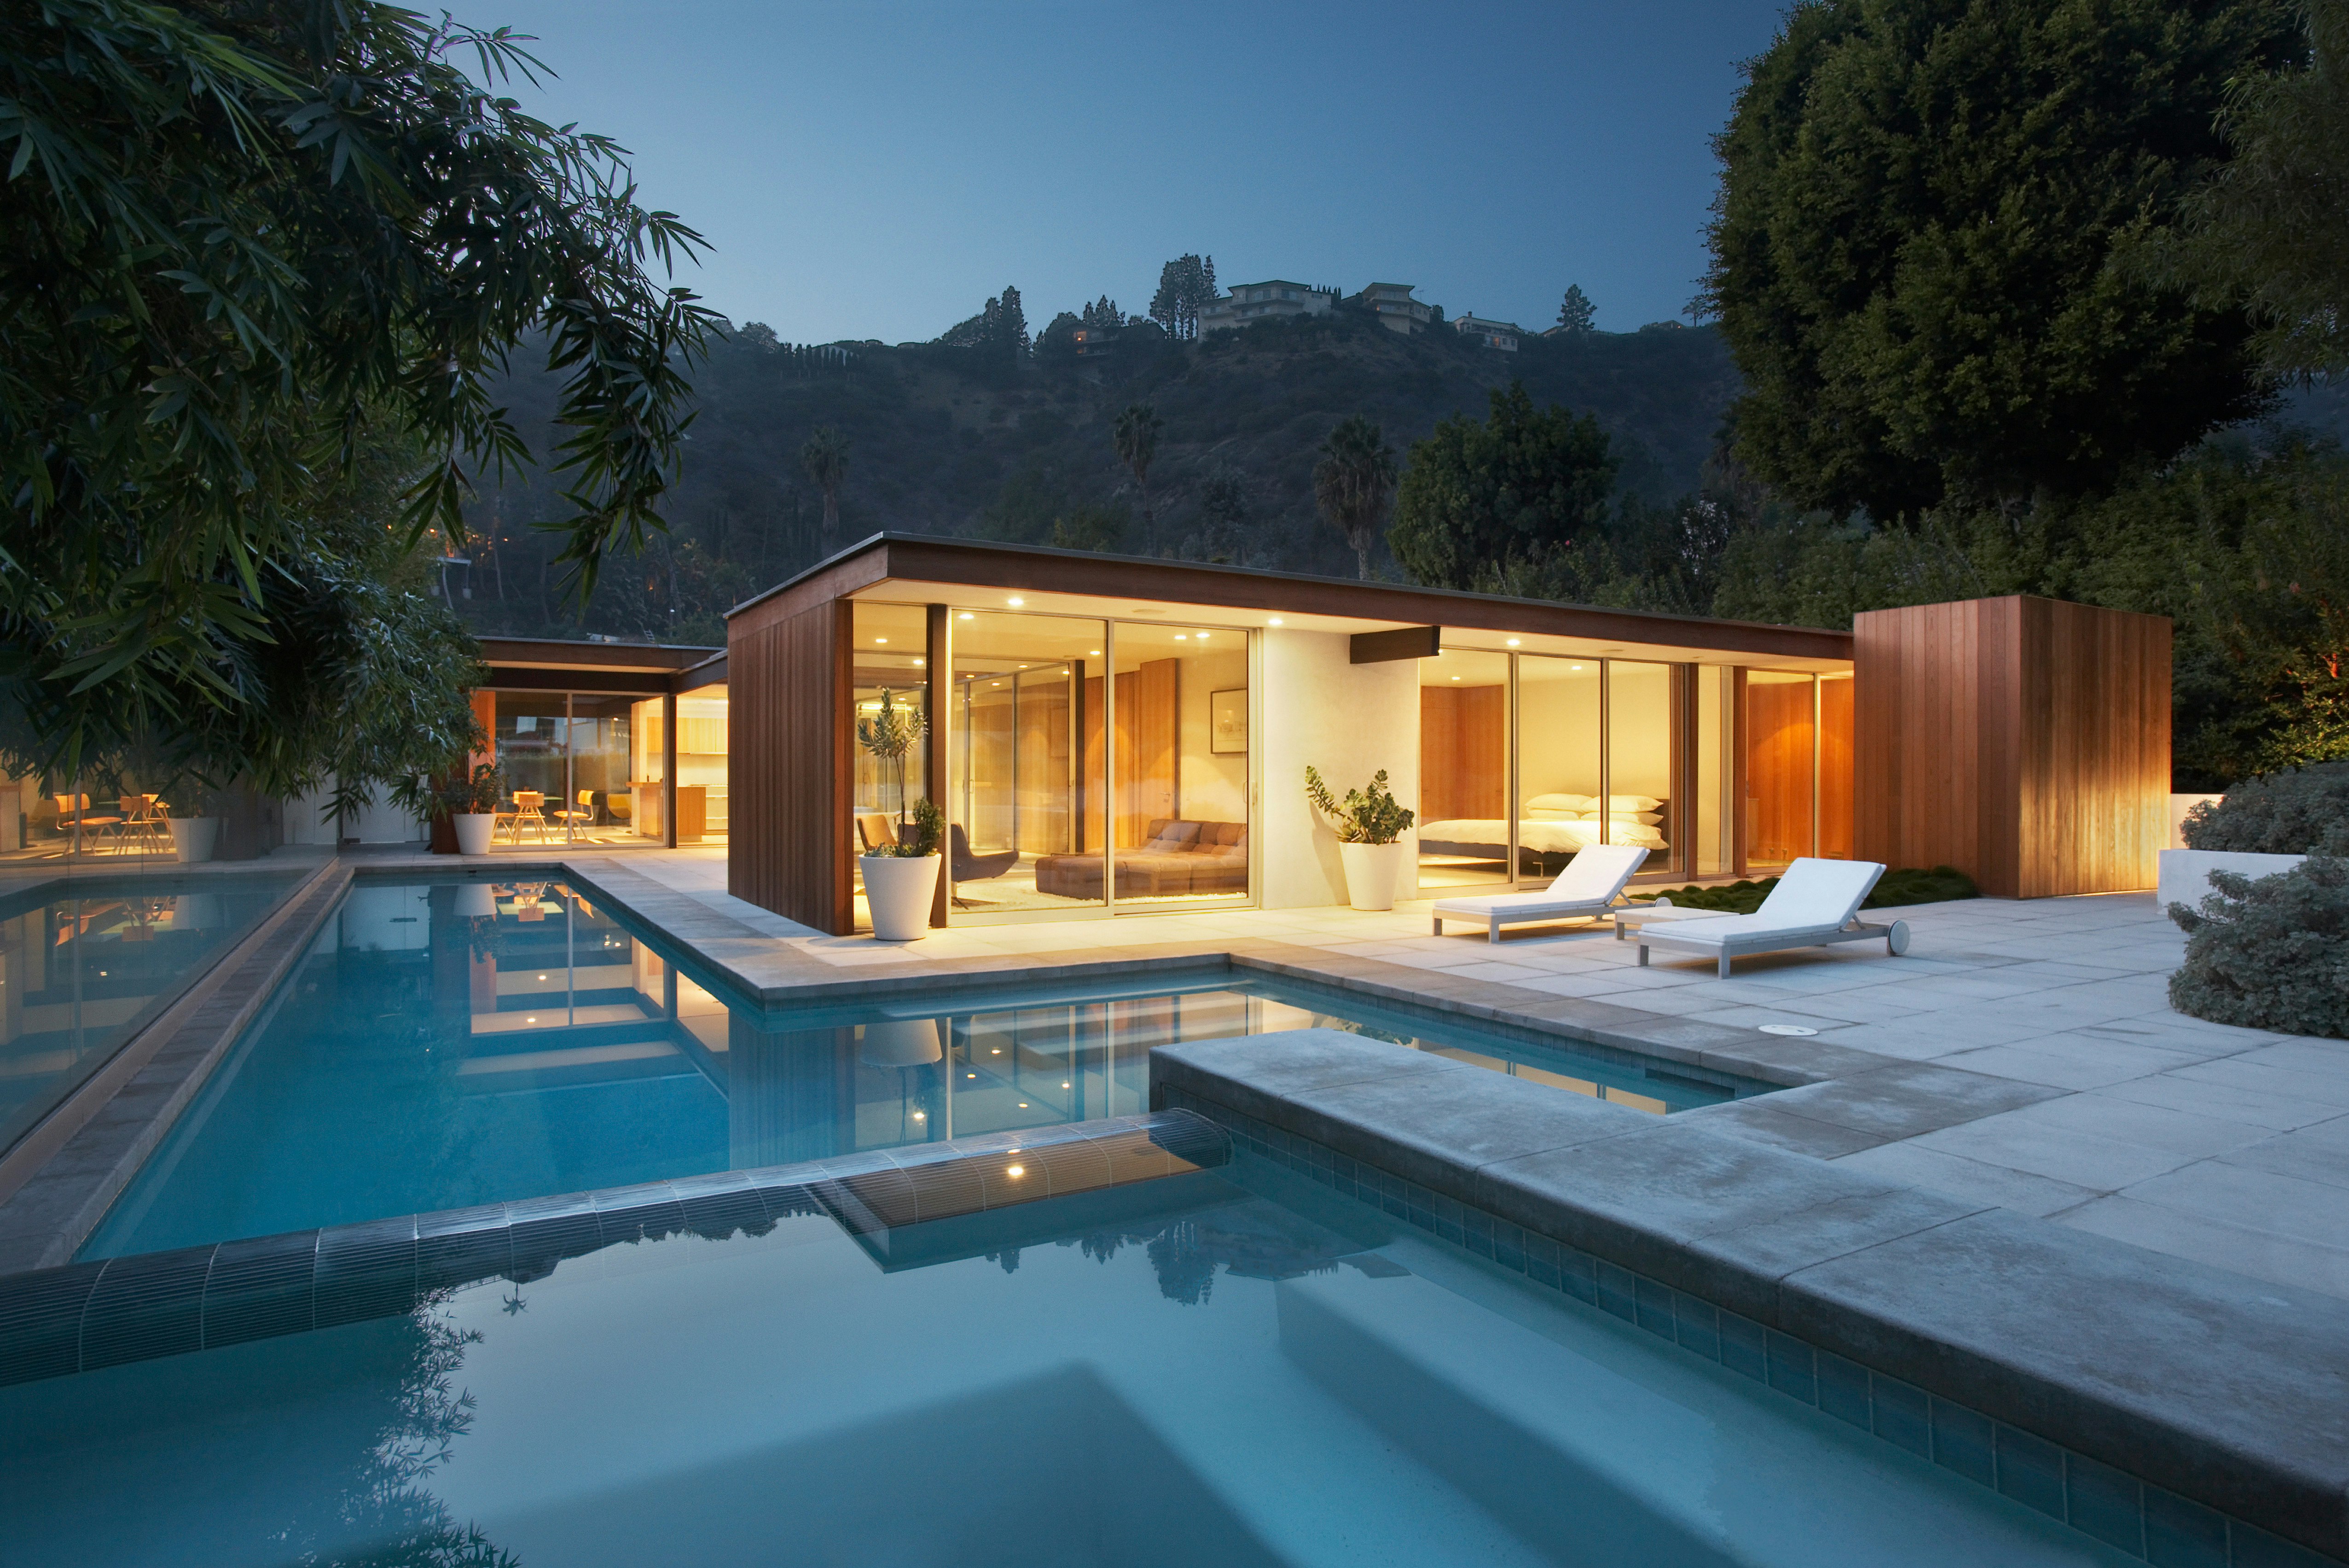 Visit a California Hillside House Rooted in Nature